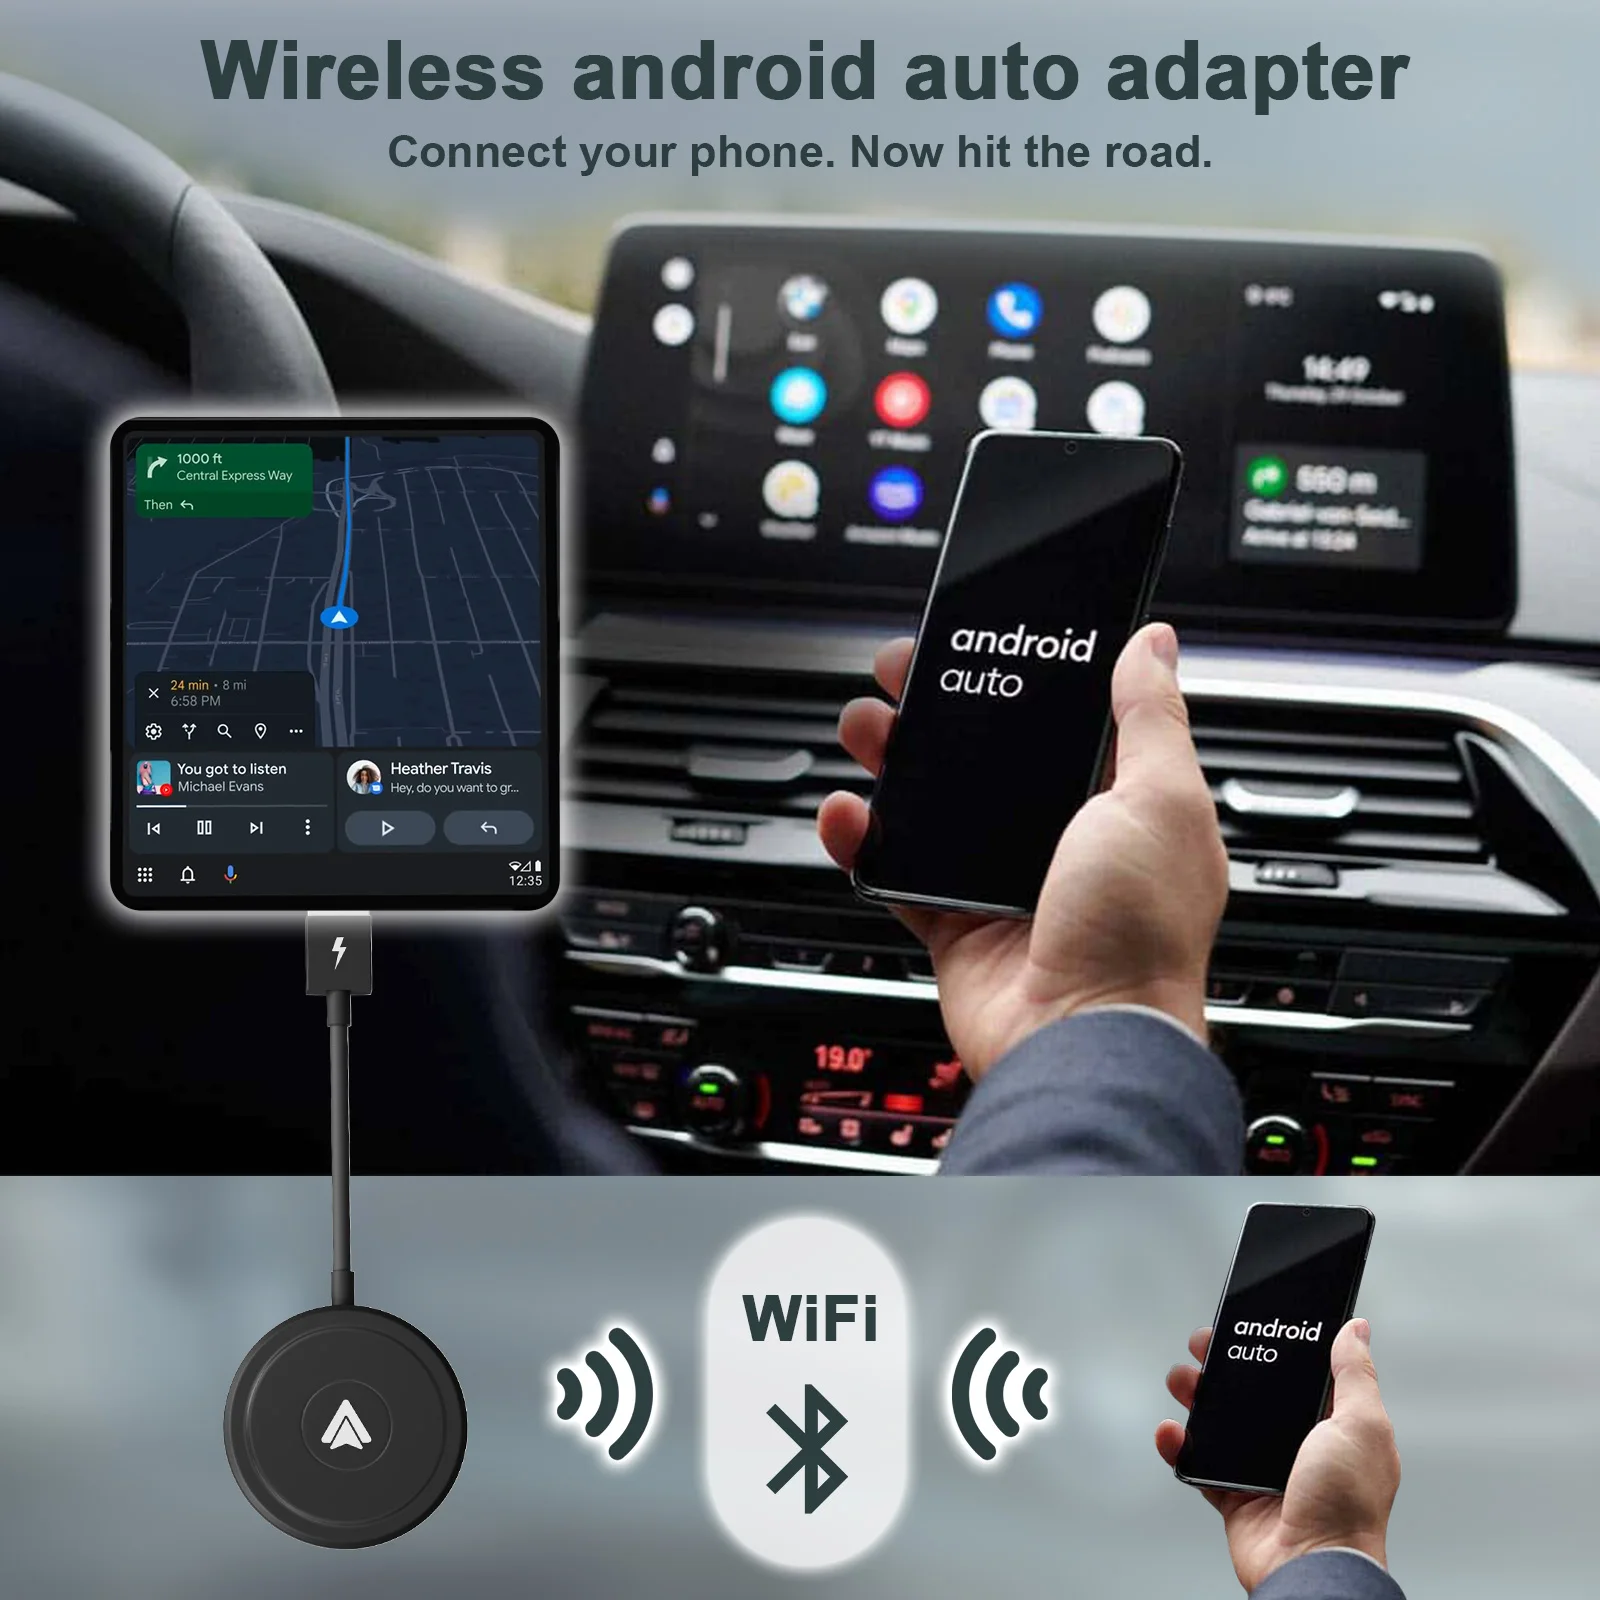 Wireless Android Auto Car Adapter Dongle for Wired Wireless